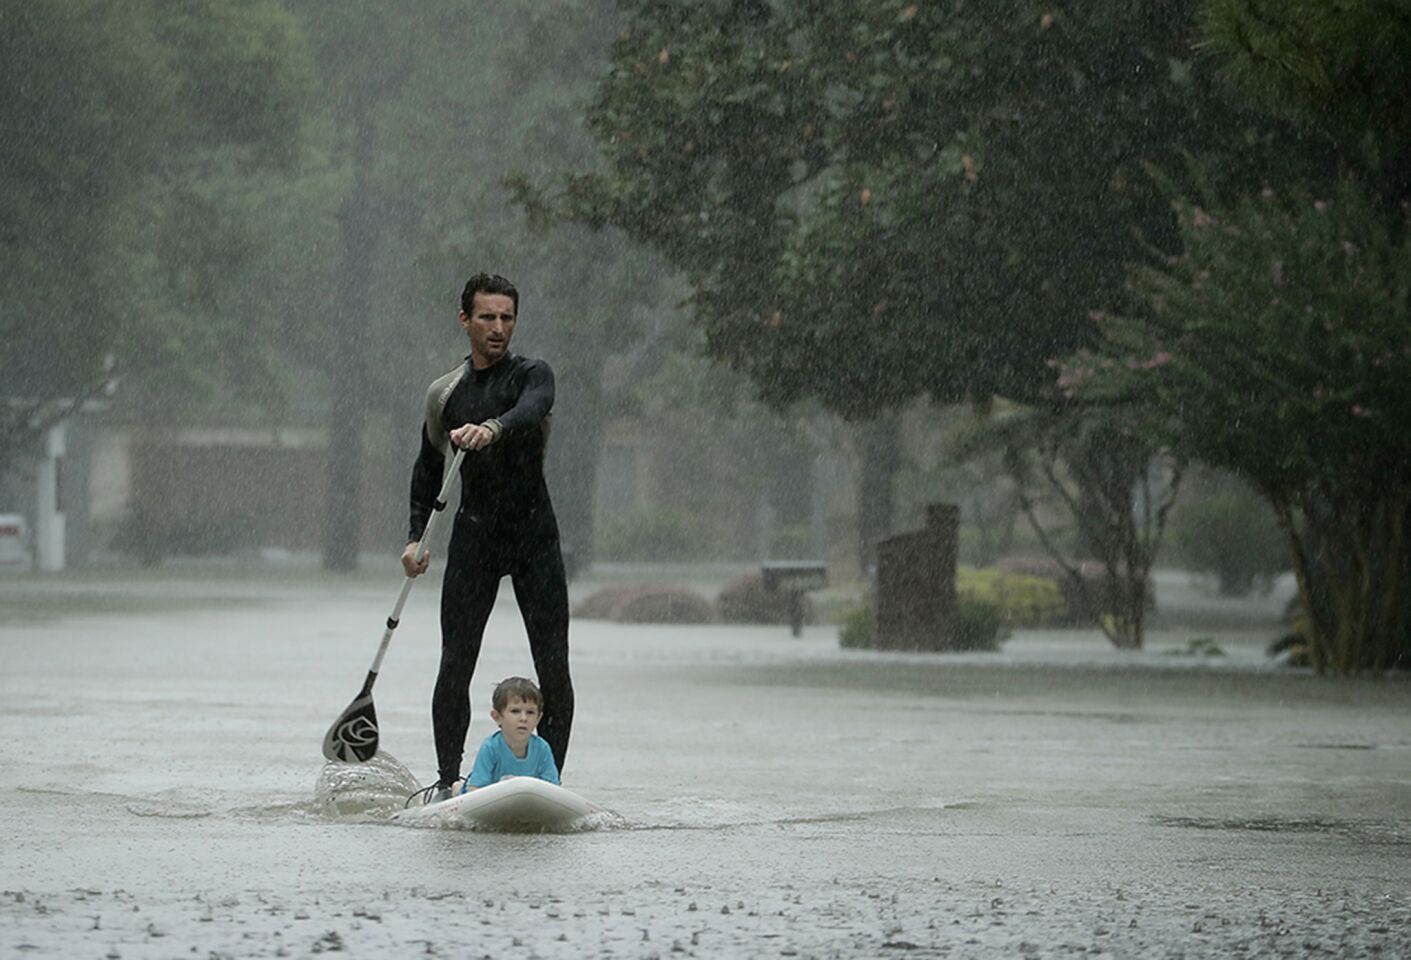 Alexendre Jorge evacuates Ethan Colman, 4, from a Houston neighborhood inundated by floodwaters from Tropical Storm Harvey.